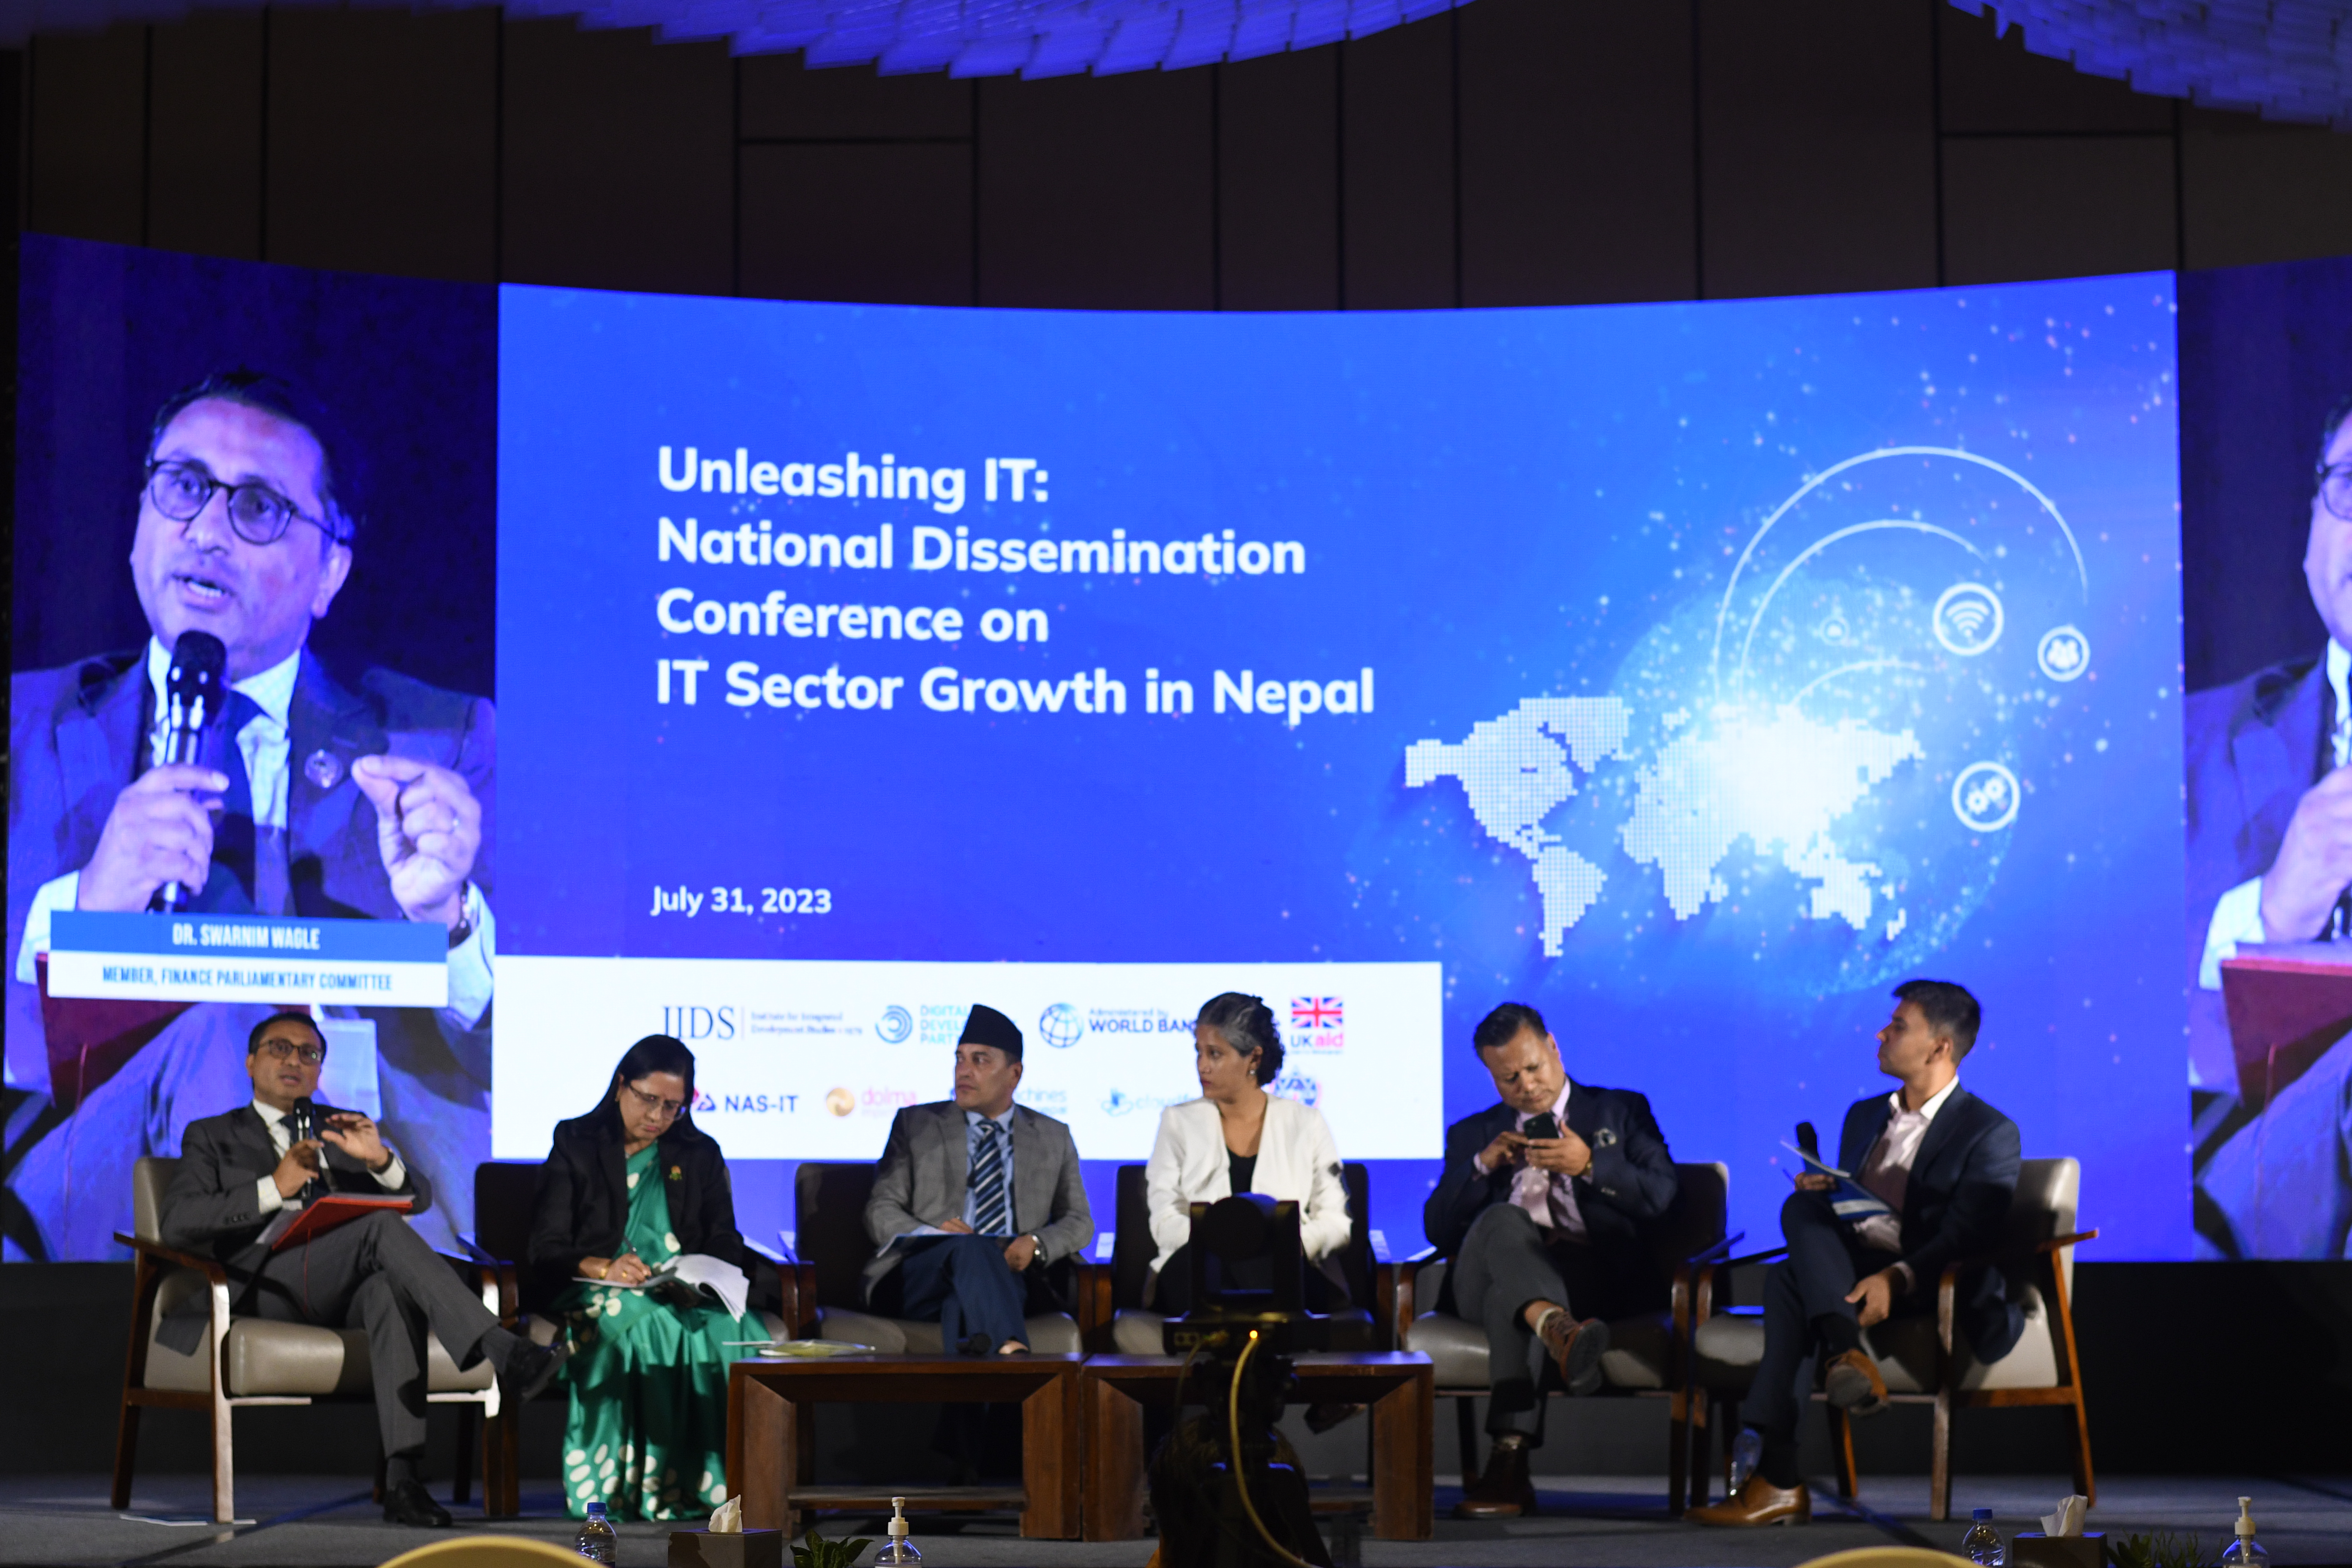 National Dissemination Conference on IT Sector Growth in Nepal